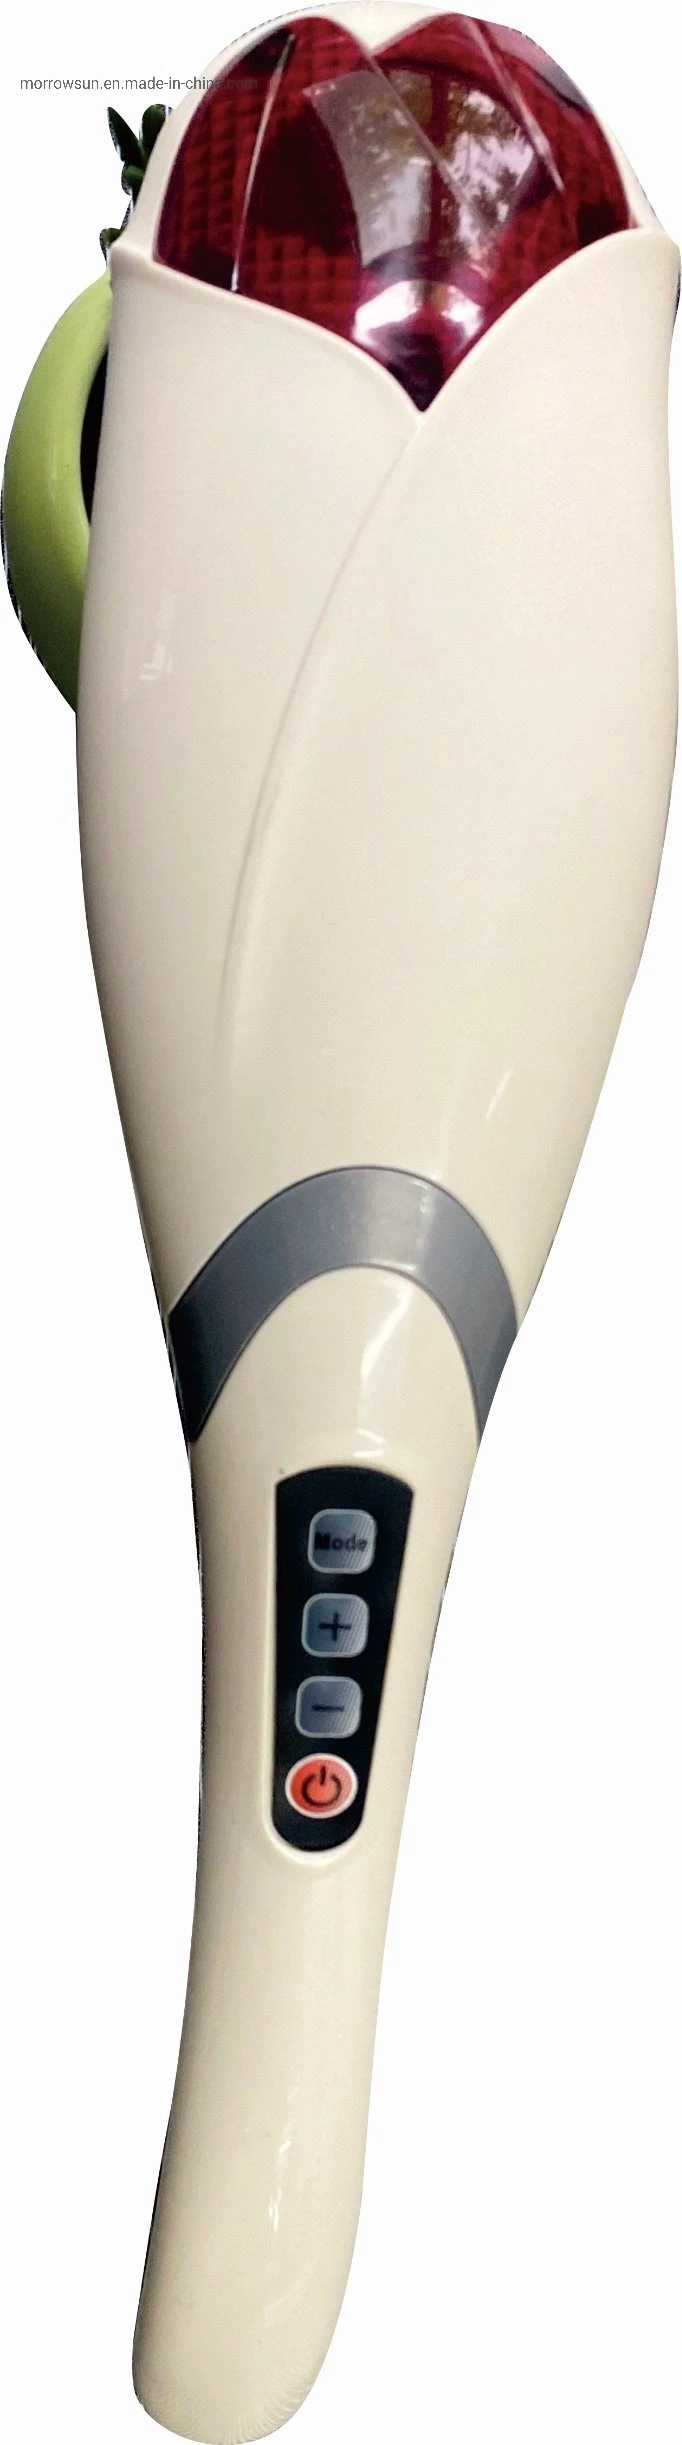 Cordless Lotus Design Whole Body Infrared Therapy Portable Handheld Massage Hammer with USB Cable and Multi-Vibration Heads